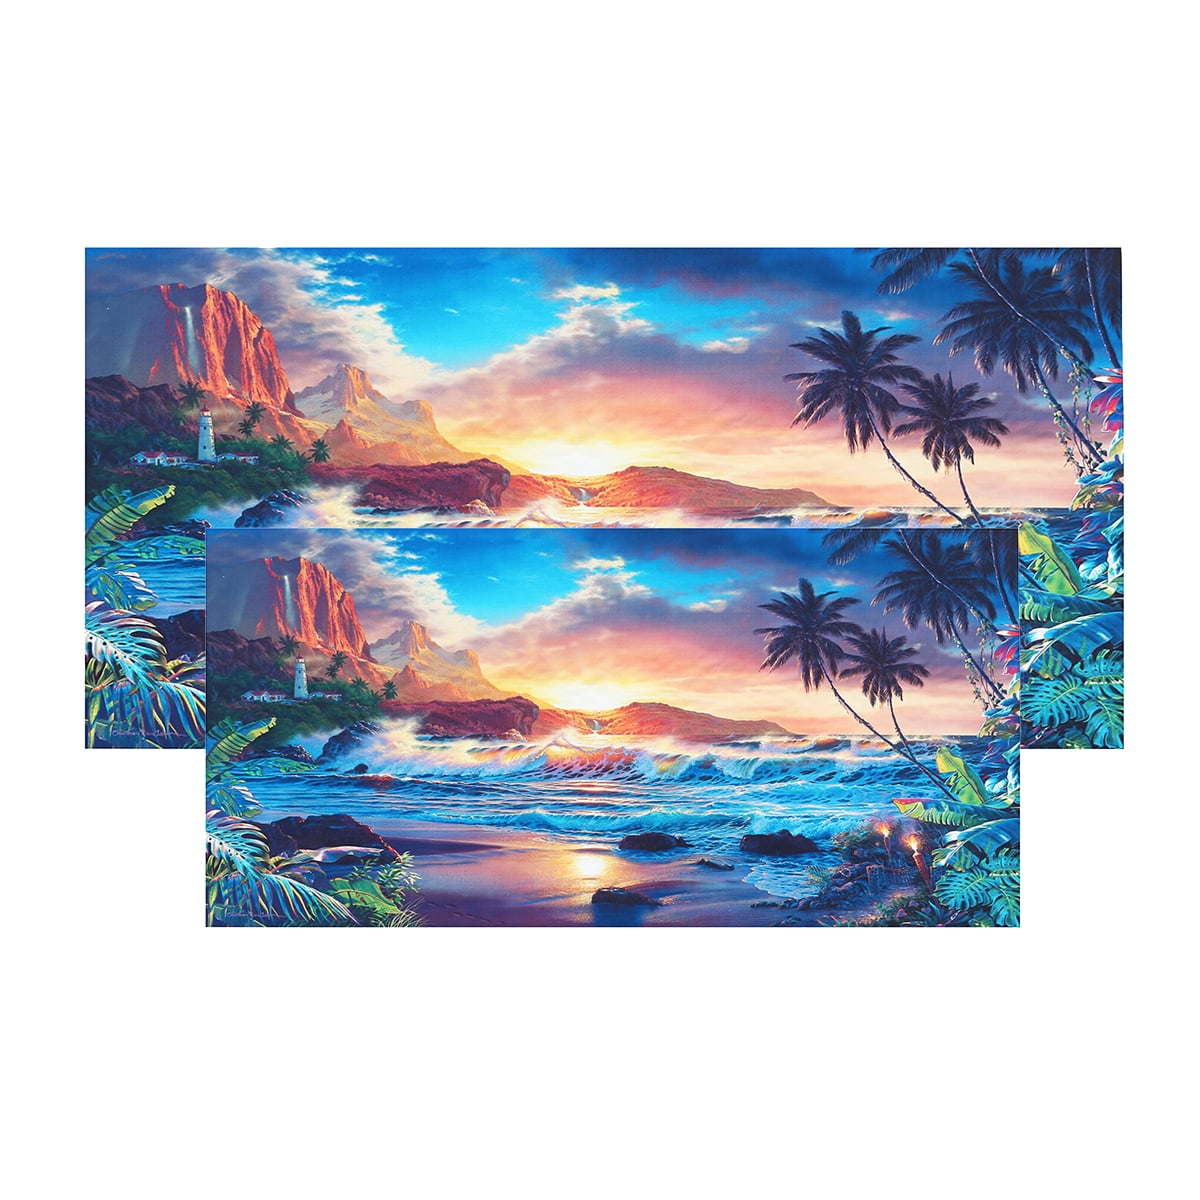 Stunning SEASCAPE SUNSET  Canvas Print Framed Photo Picture Wall Artwork WA 